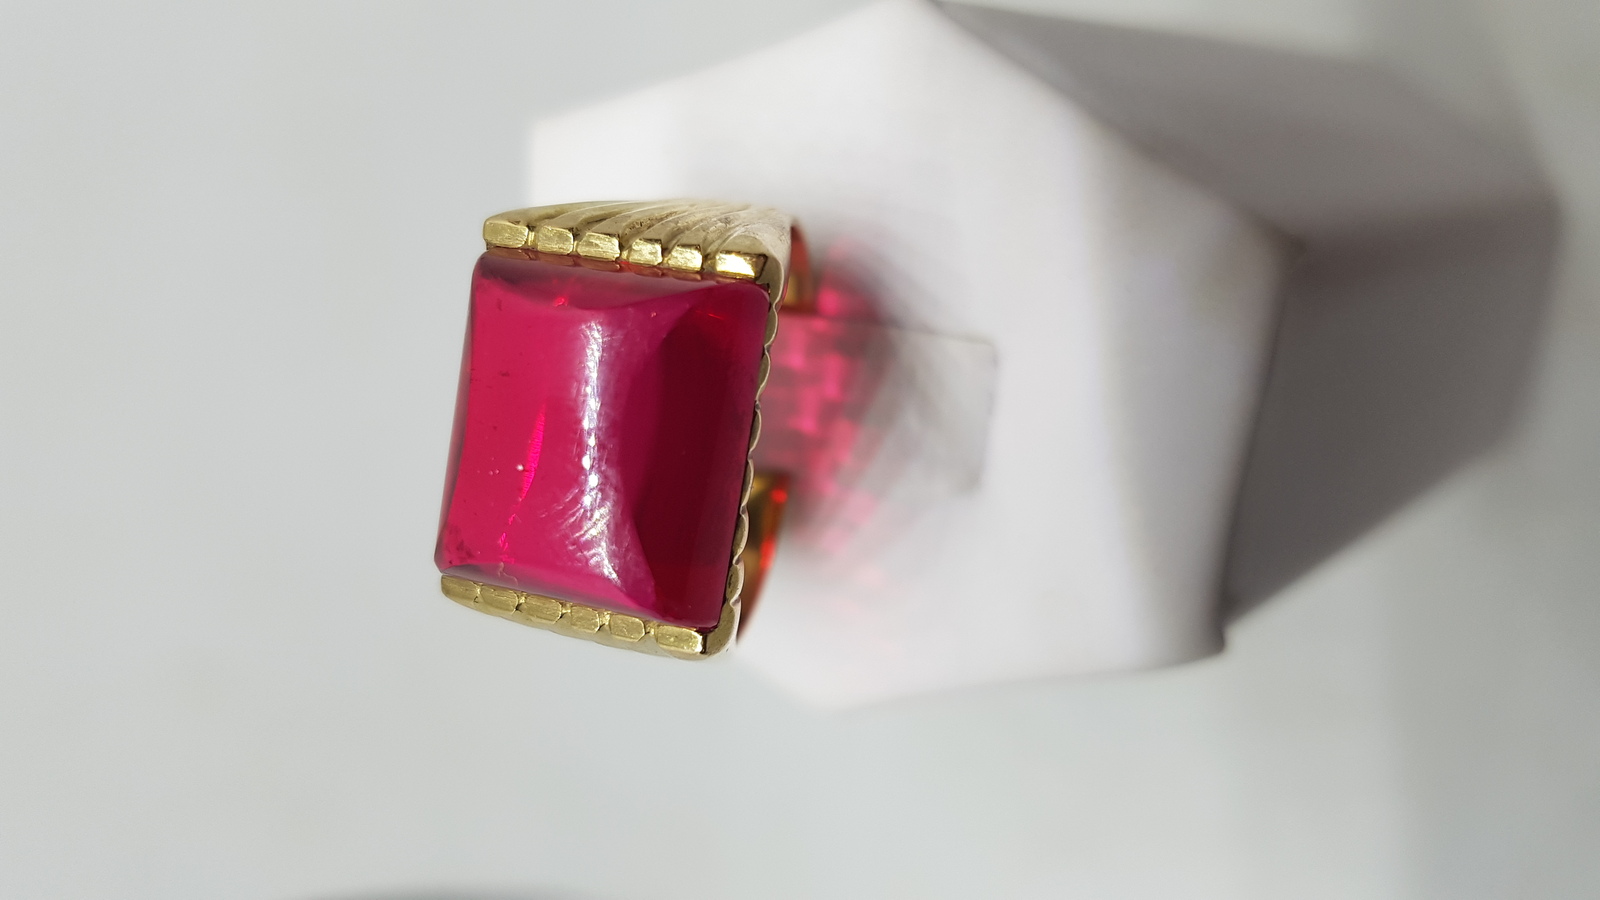 9ct Gold Signet Ring Set With Large Synthetic Ruby Stone